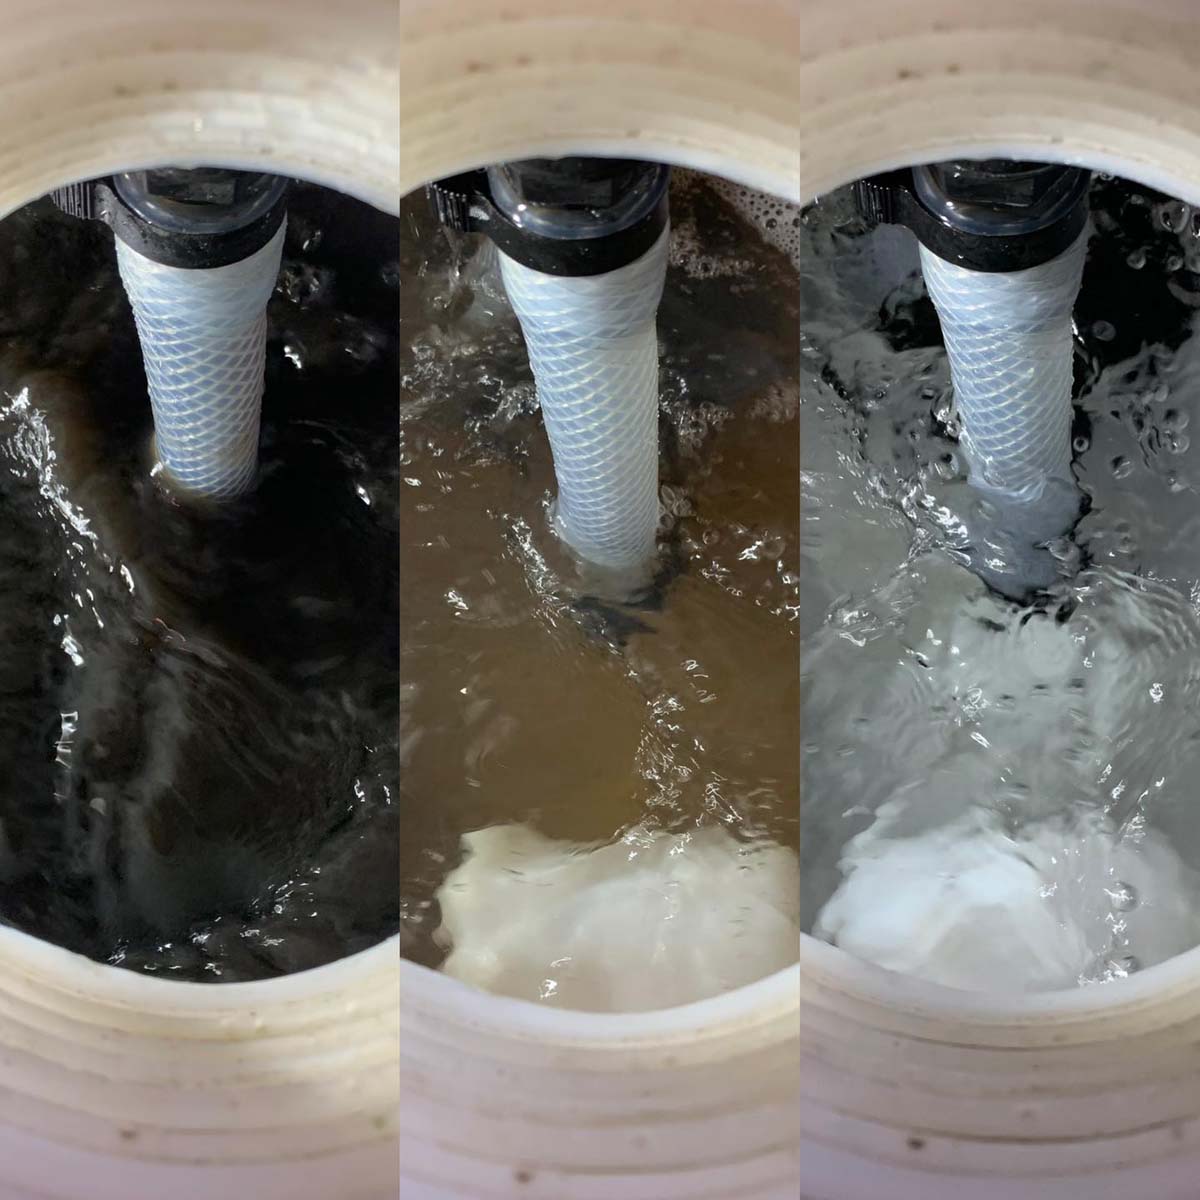 Power Flushing stages of water clarity.